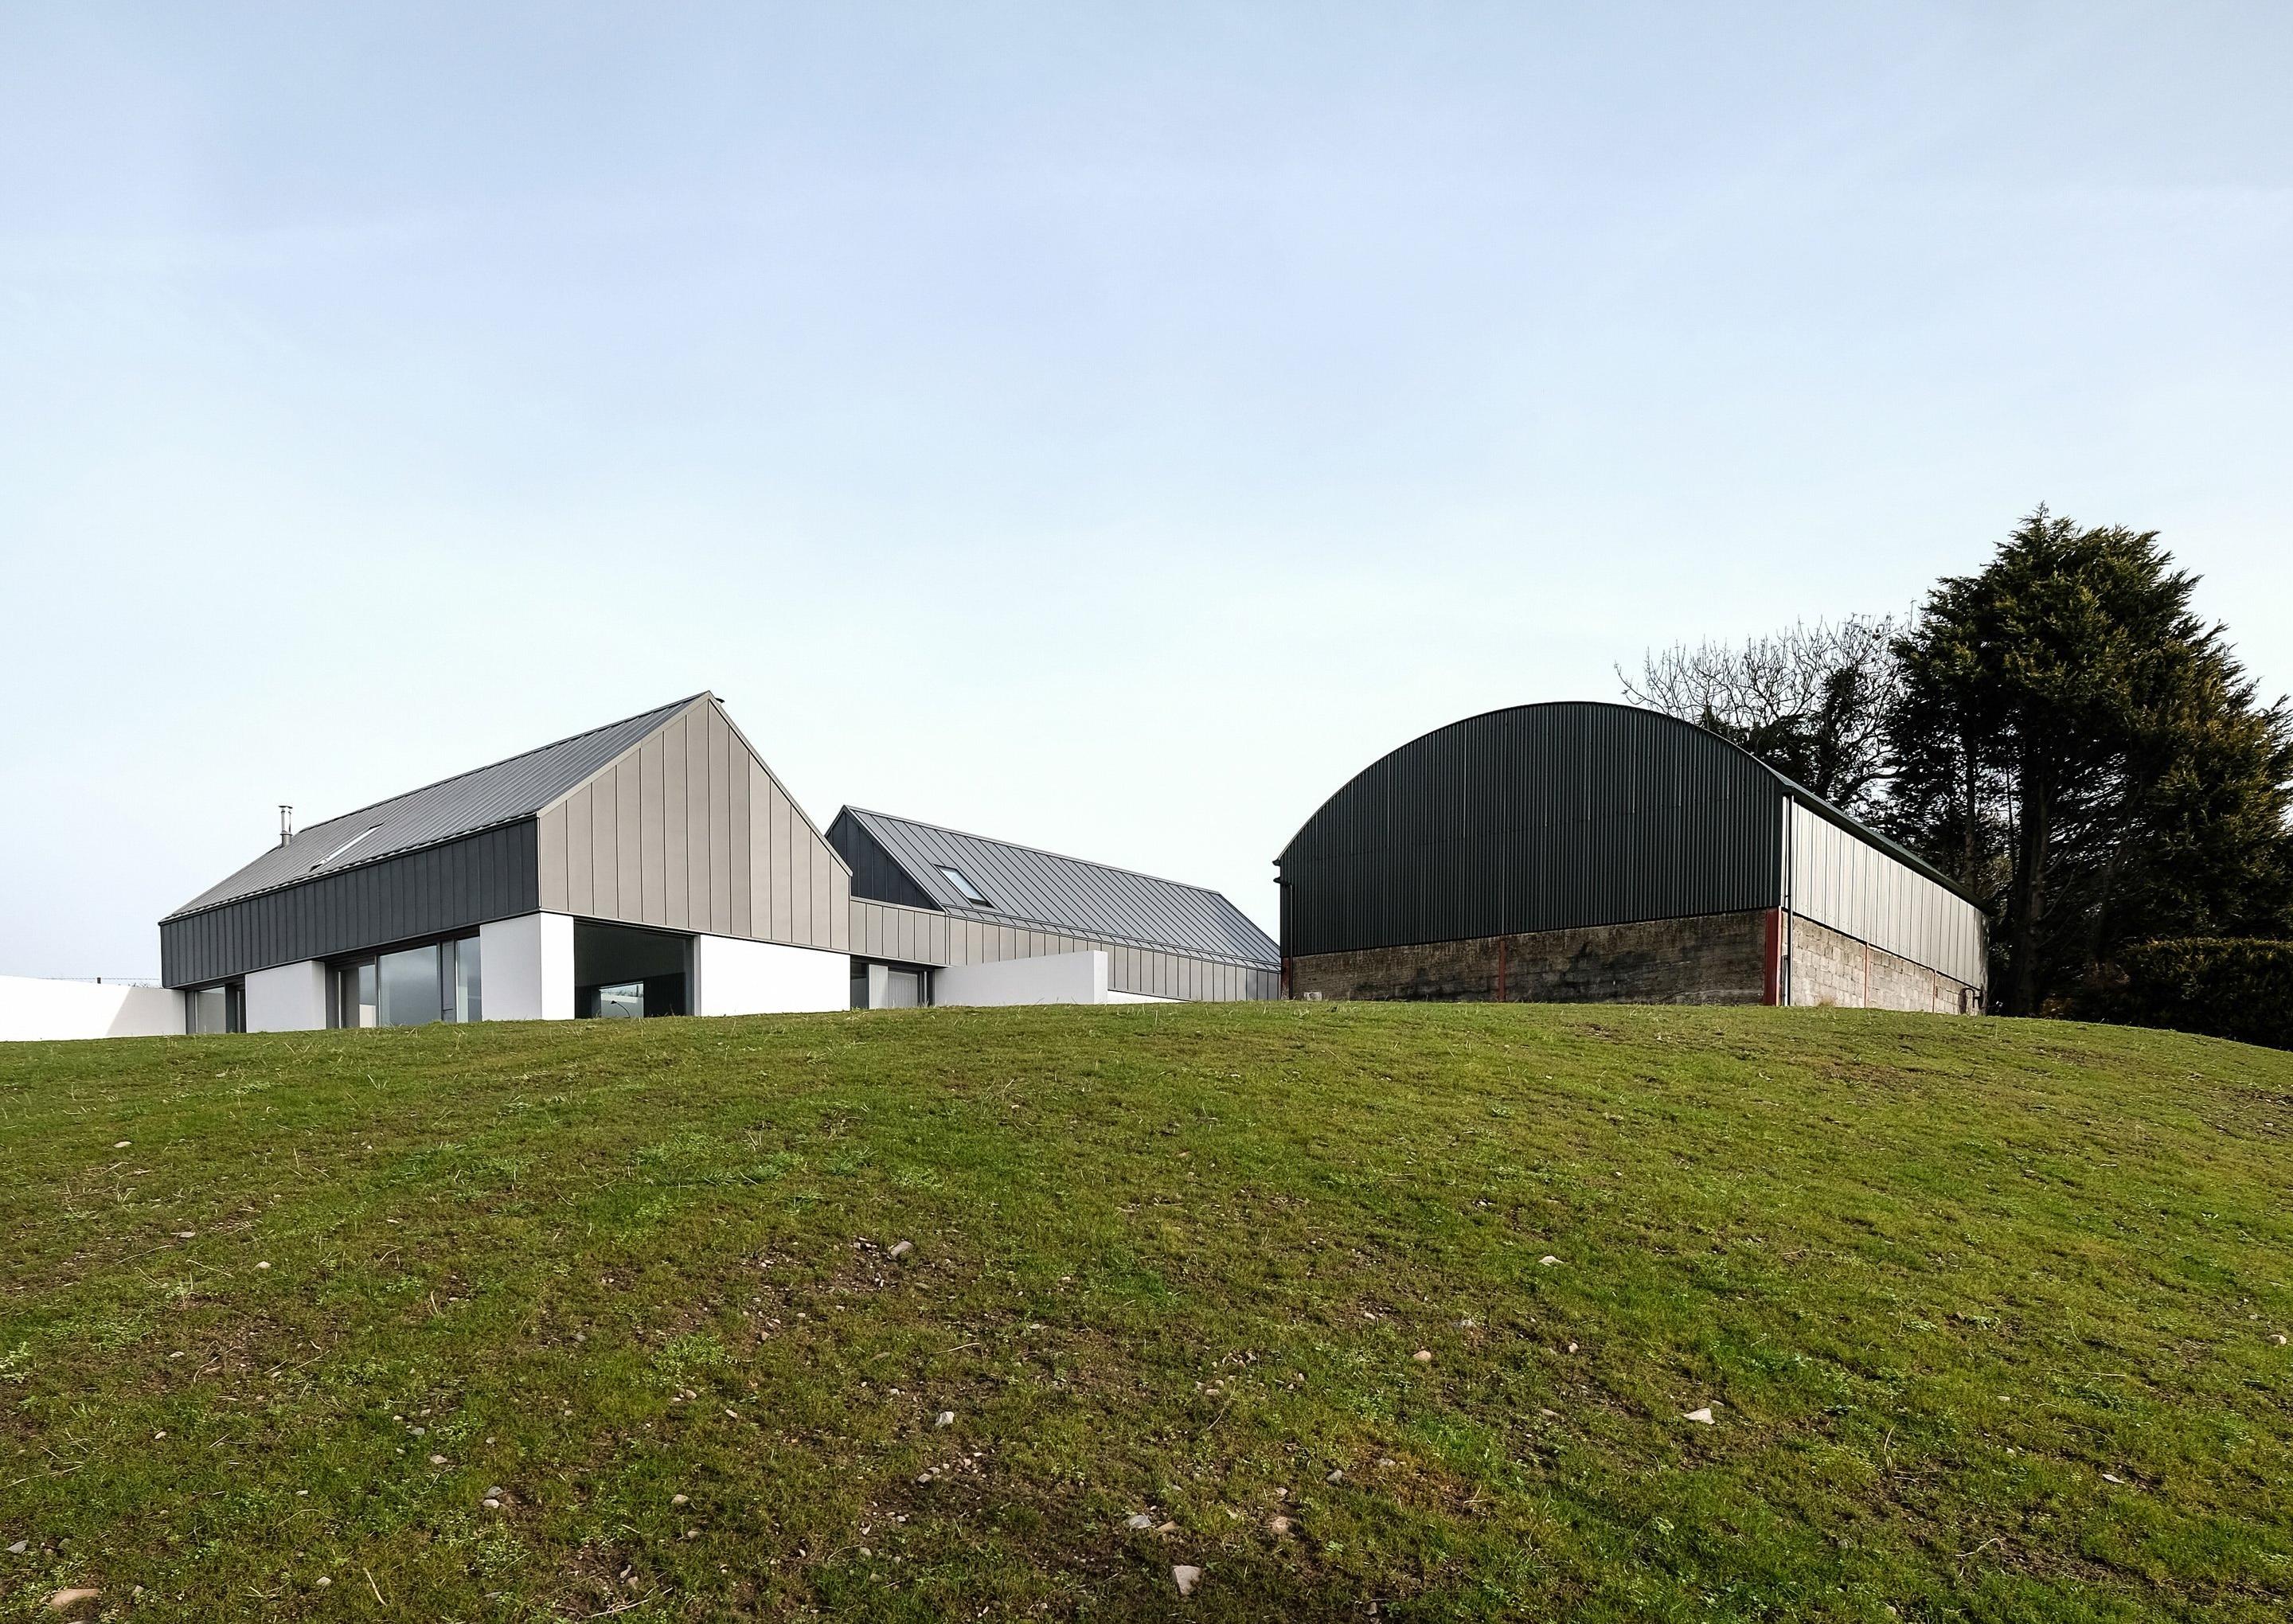 House Lessans, an exquisitely simple home in County Down designed by McGonigle McGrath, has been named RIBA House of the Year 2019